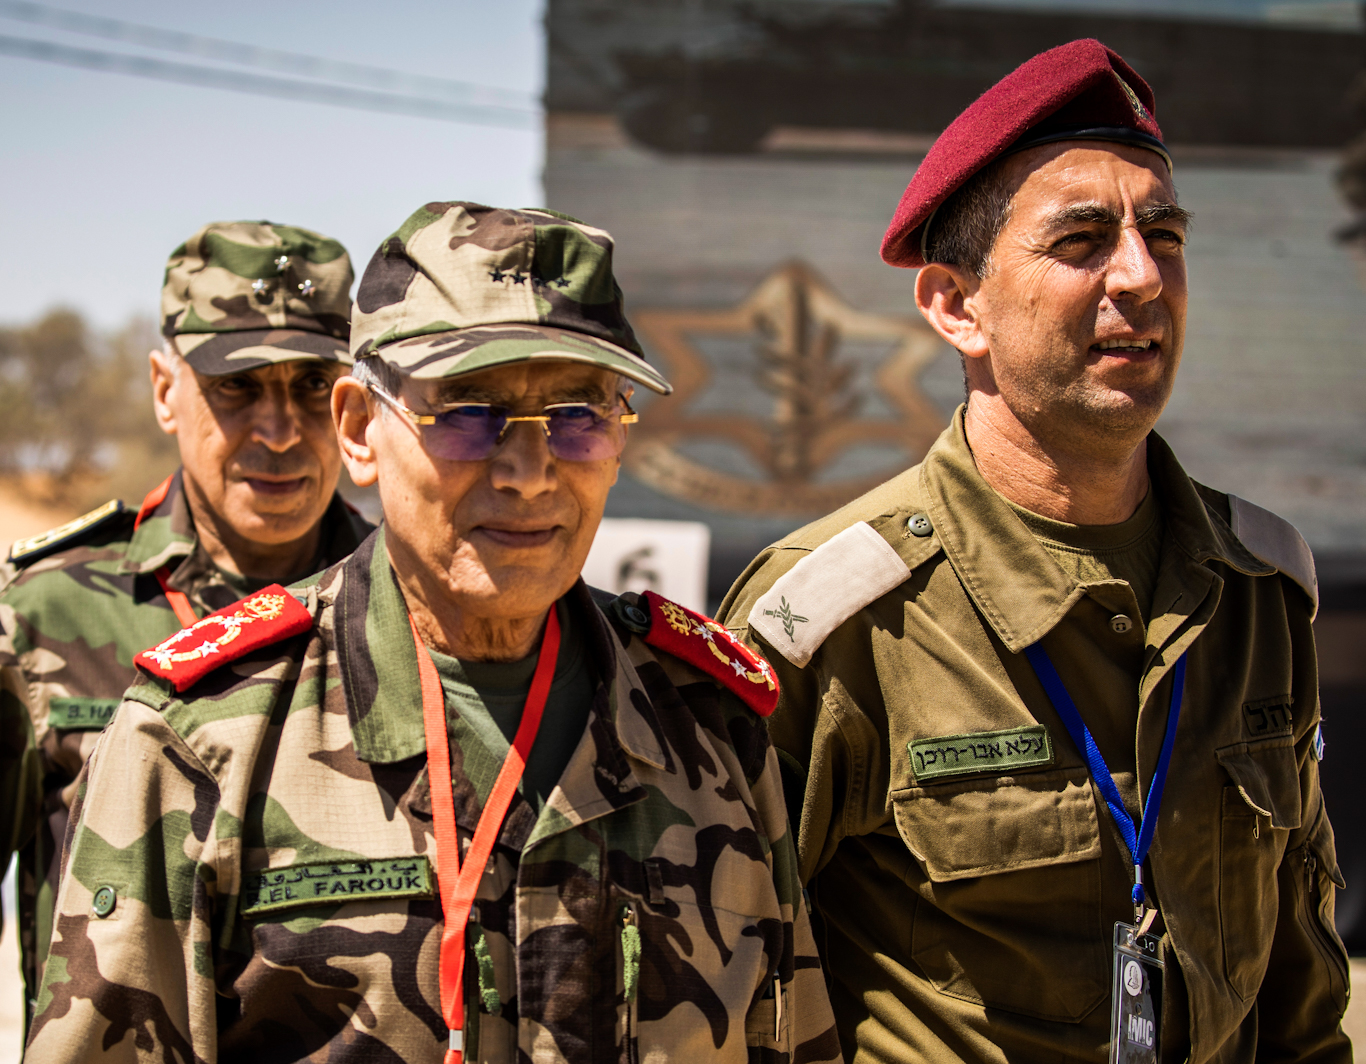 Moroccan General Belkhir El Farouk, left, flanked by Israeli military personnel, attends a live-fire exercise at Tze'elim military base in Israel, September 2022. Photo: DPA/AP.